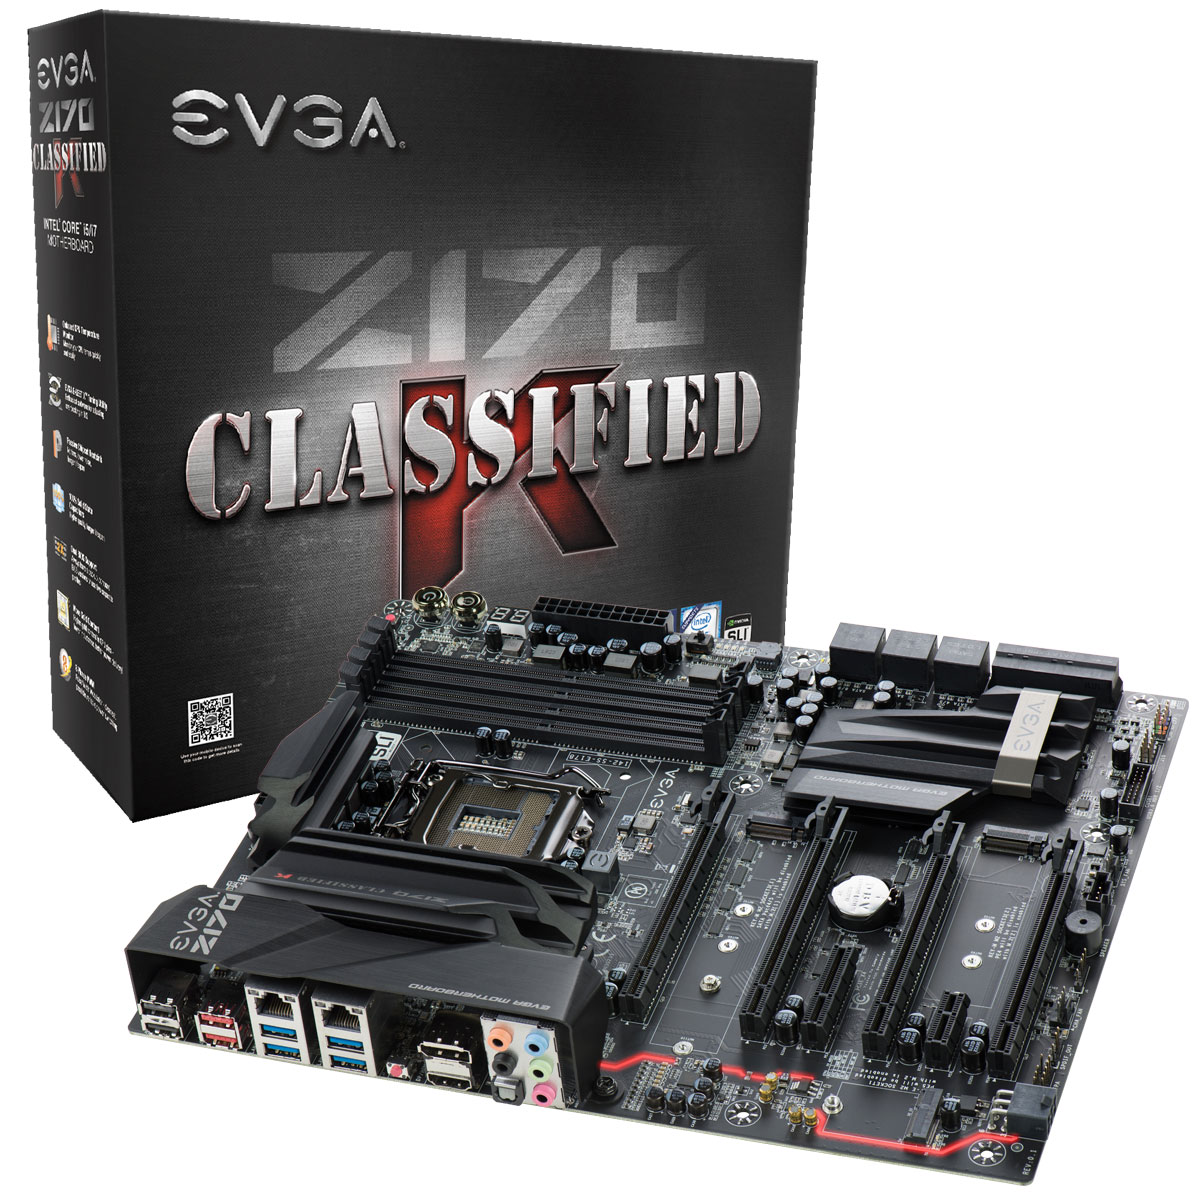 Media asset in full size related to 3dfxzone.it news item entitled as follows: Overclocking: EVGA lancia la motherboard Z170 Classified K per CPU Skylake | Image Name: news23648_EVGA-Z170-Classified-K_6.jpg